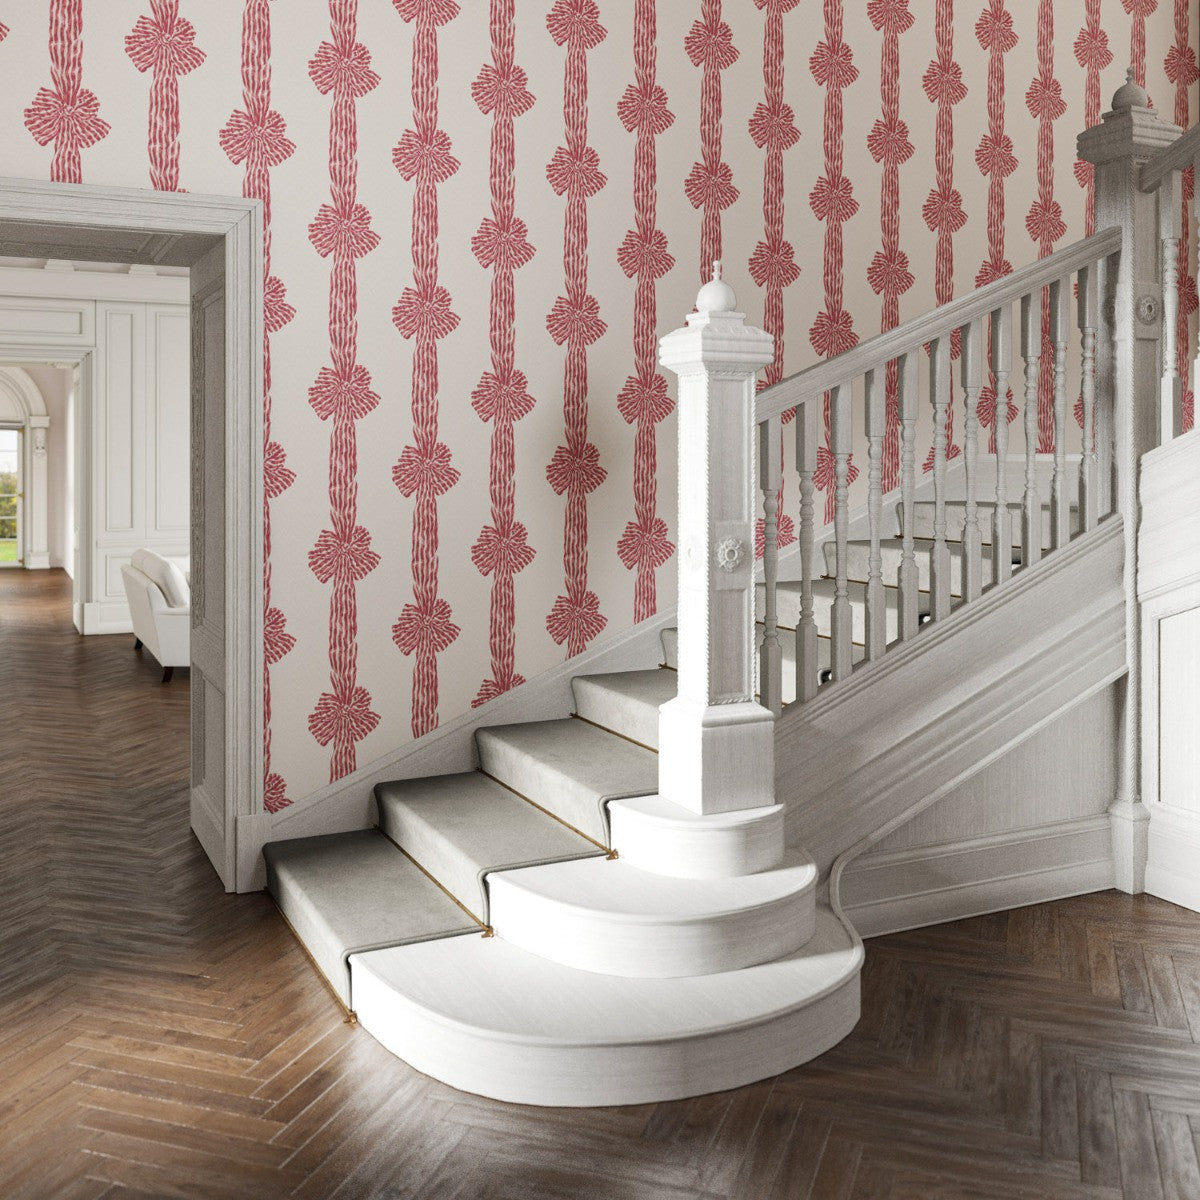 KNOTTED SASH Red Wallpaper - Warner House